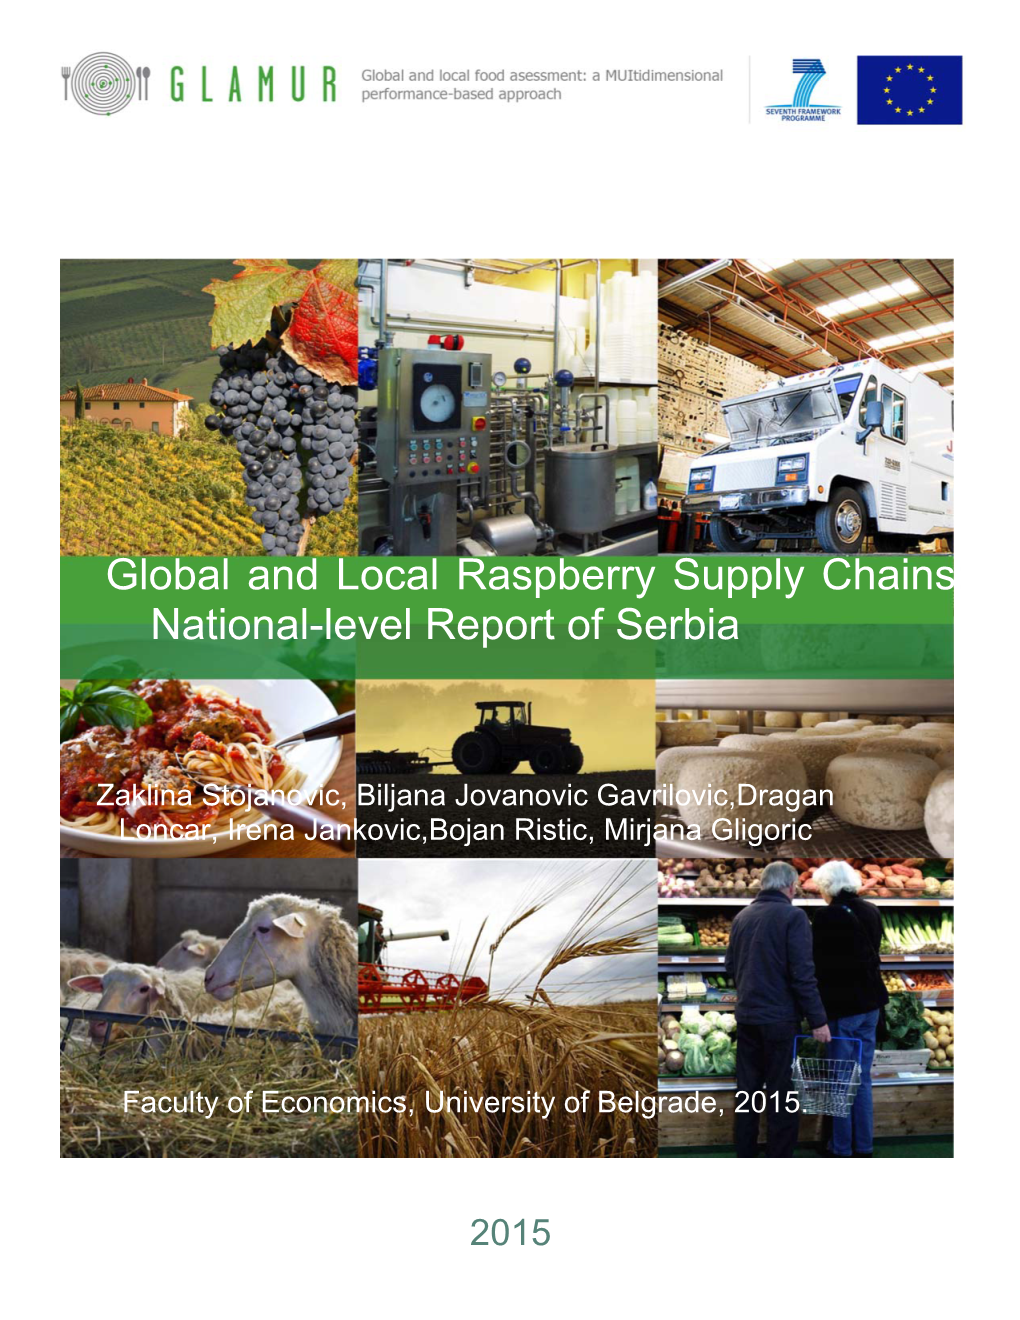 National-Level Report of Serbia